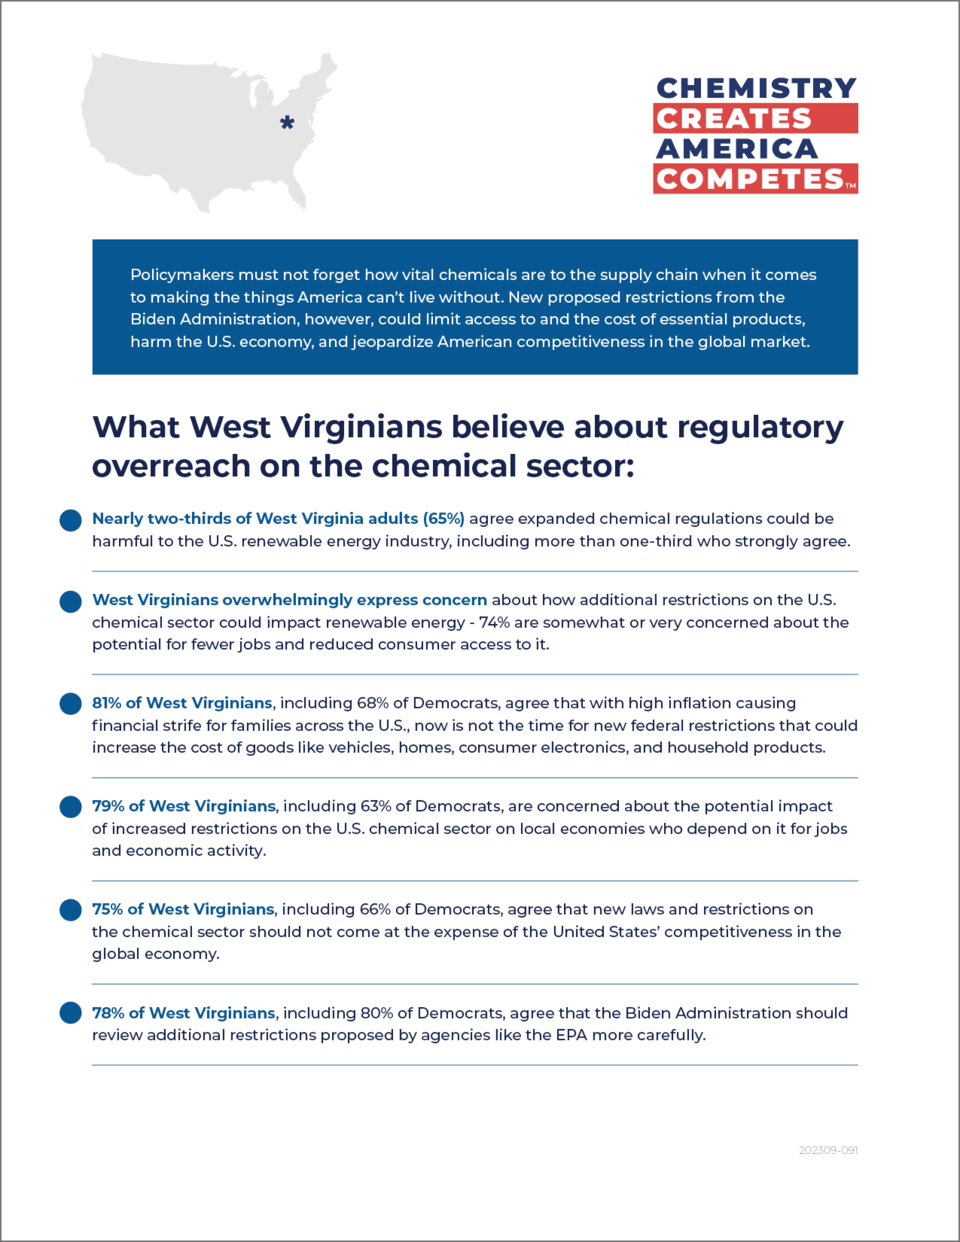 What West Virginians Believe About Regulatory Overreach on Chemical Sector - Fact Sheet